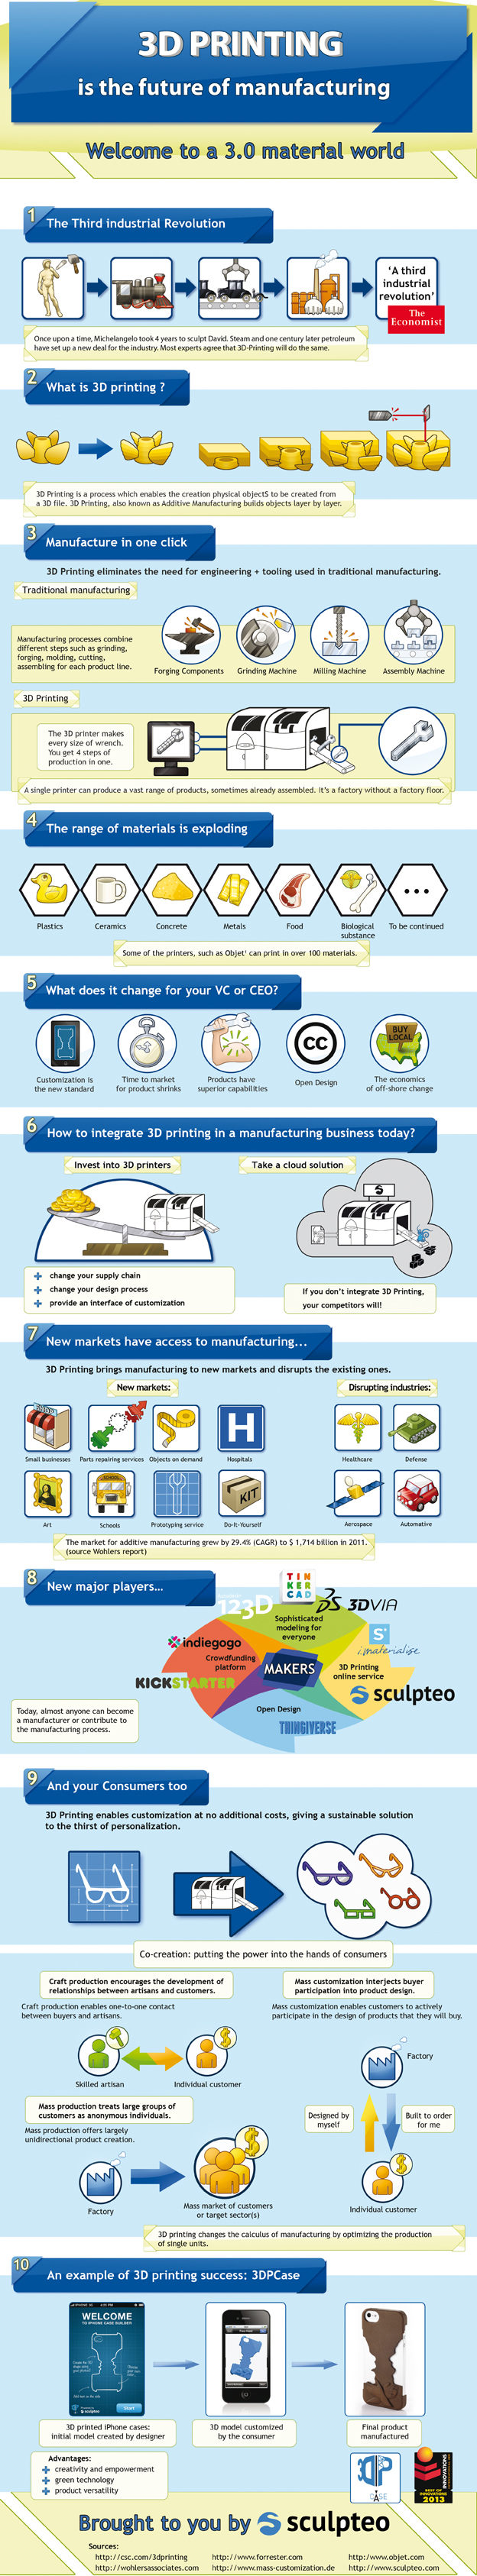 infographic-The_Future_of_Manufacturing_3D-printing